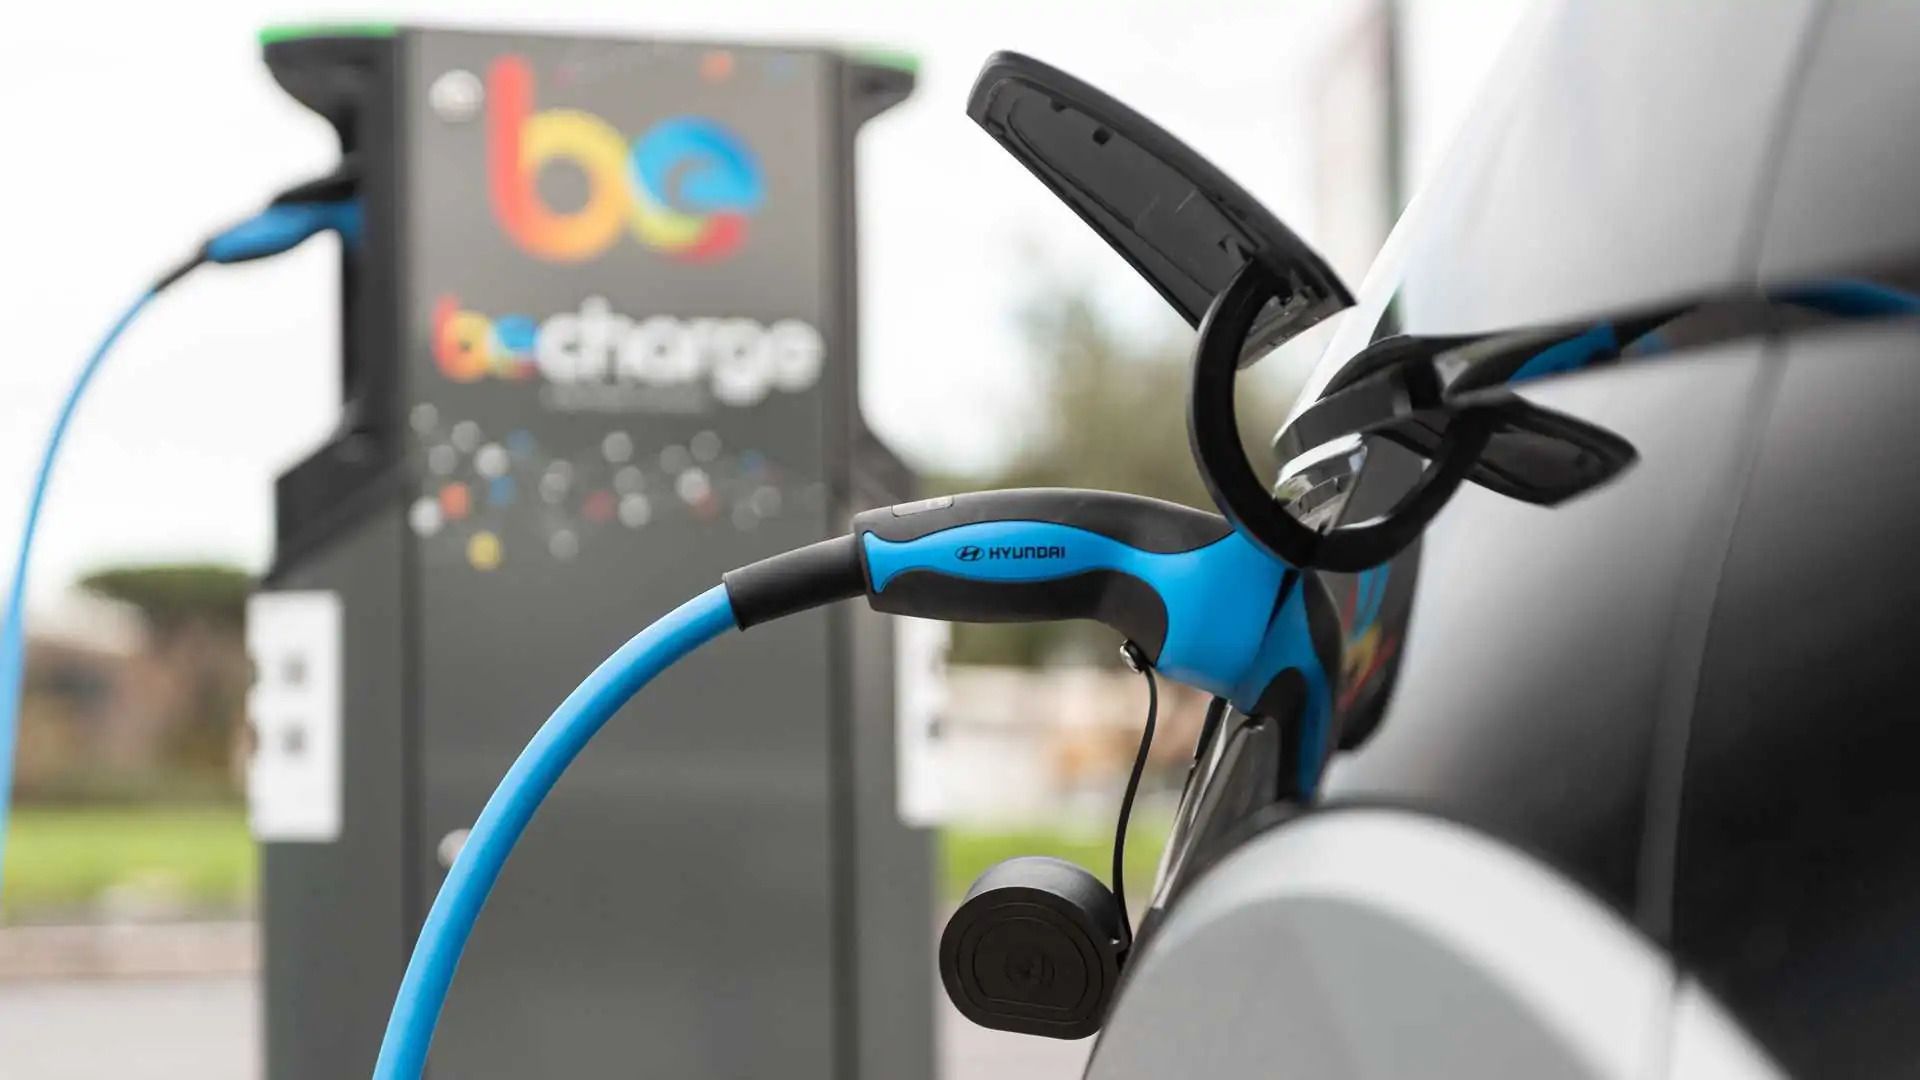 Be Charge is also partner in InsideEVs’ electric car efficiency supertest